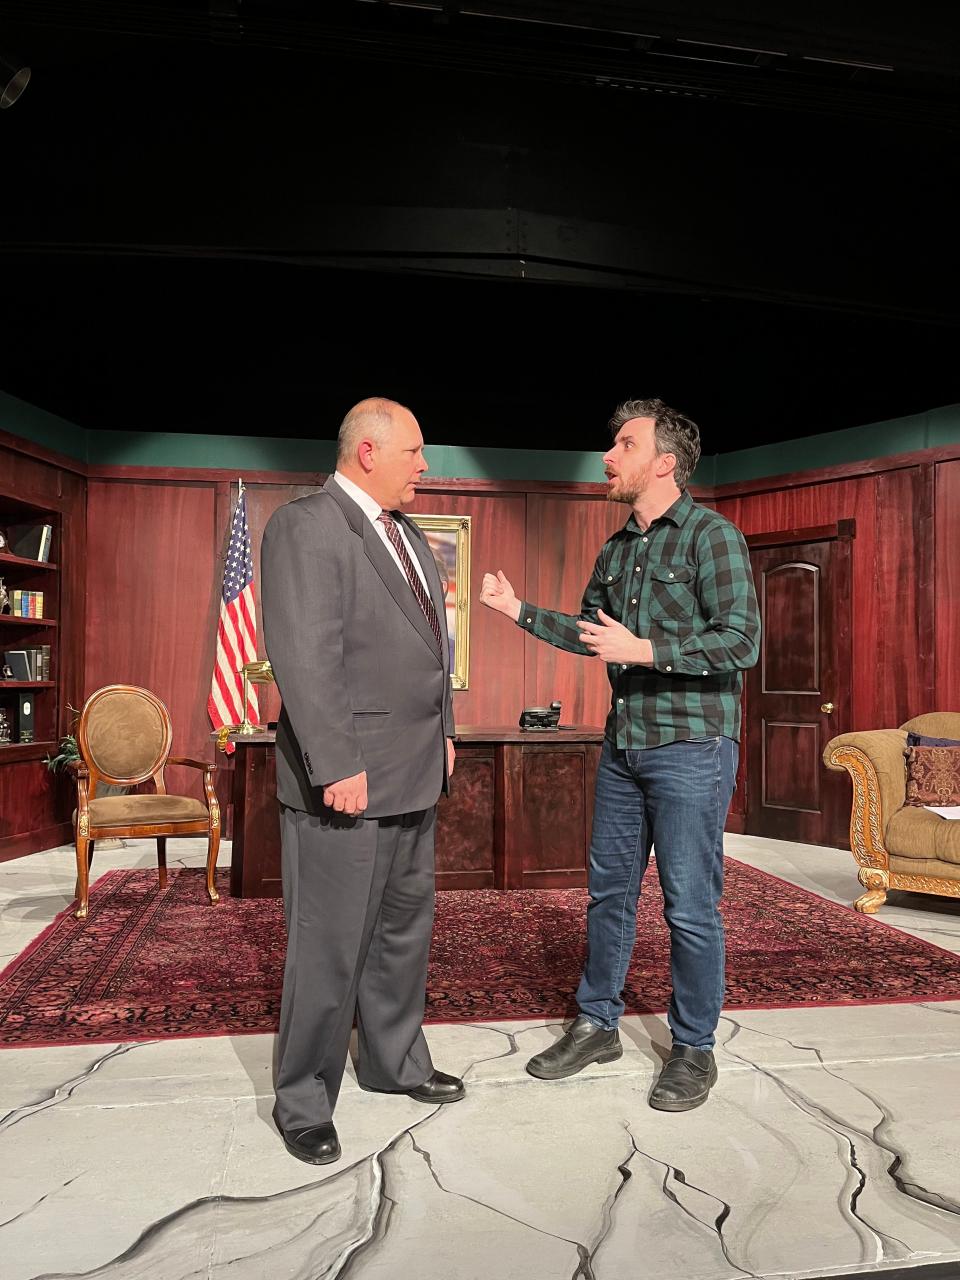 Bill Downey, left, and Steve Prouty rehearse a scene for Twin City Players' production of Paul Slade Smith's "The Outsider" that opens March 3 and continues through March 19, 2023, at the theater in St. Joseph.